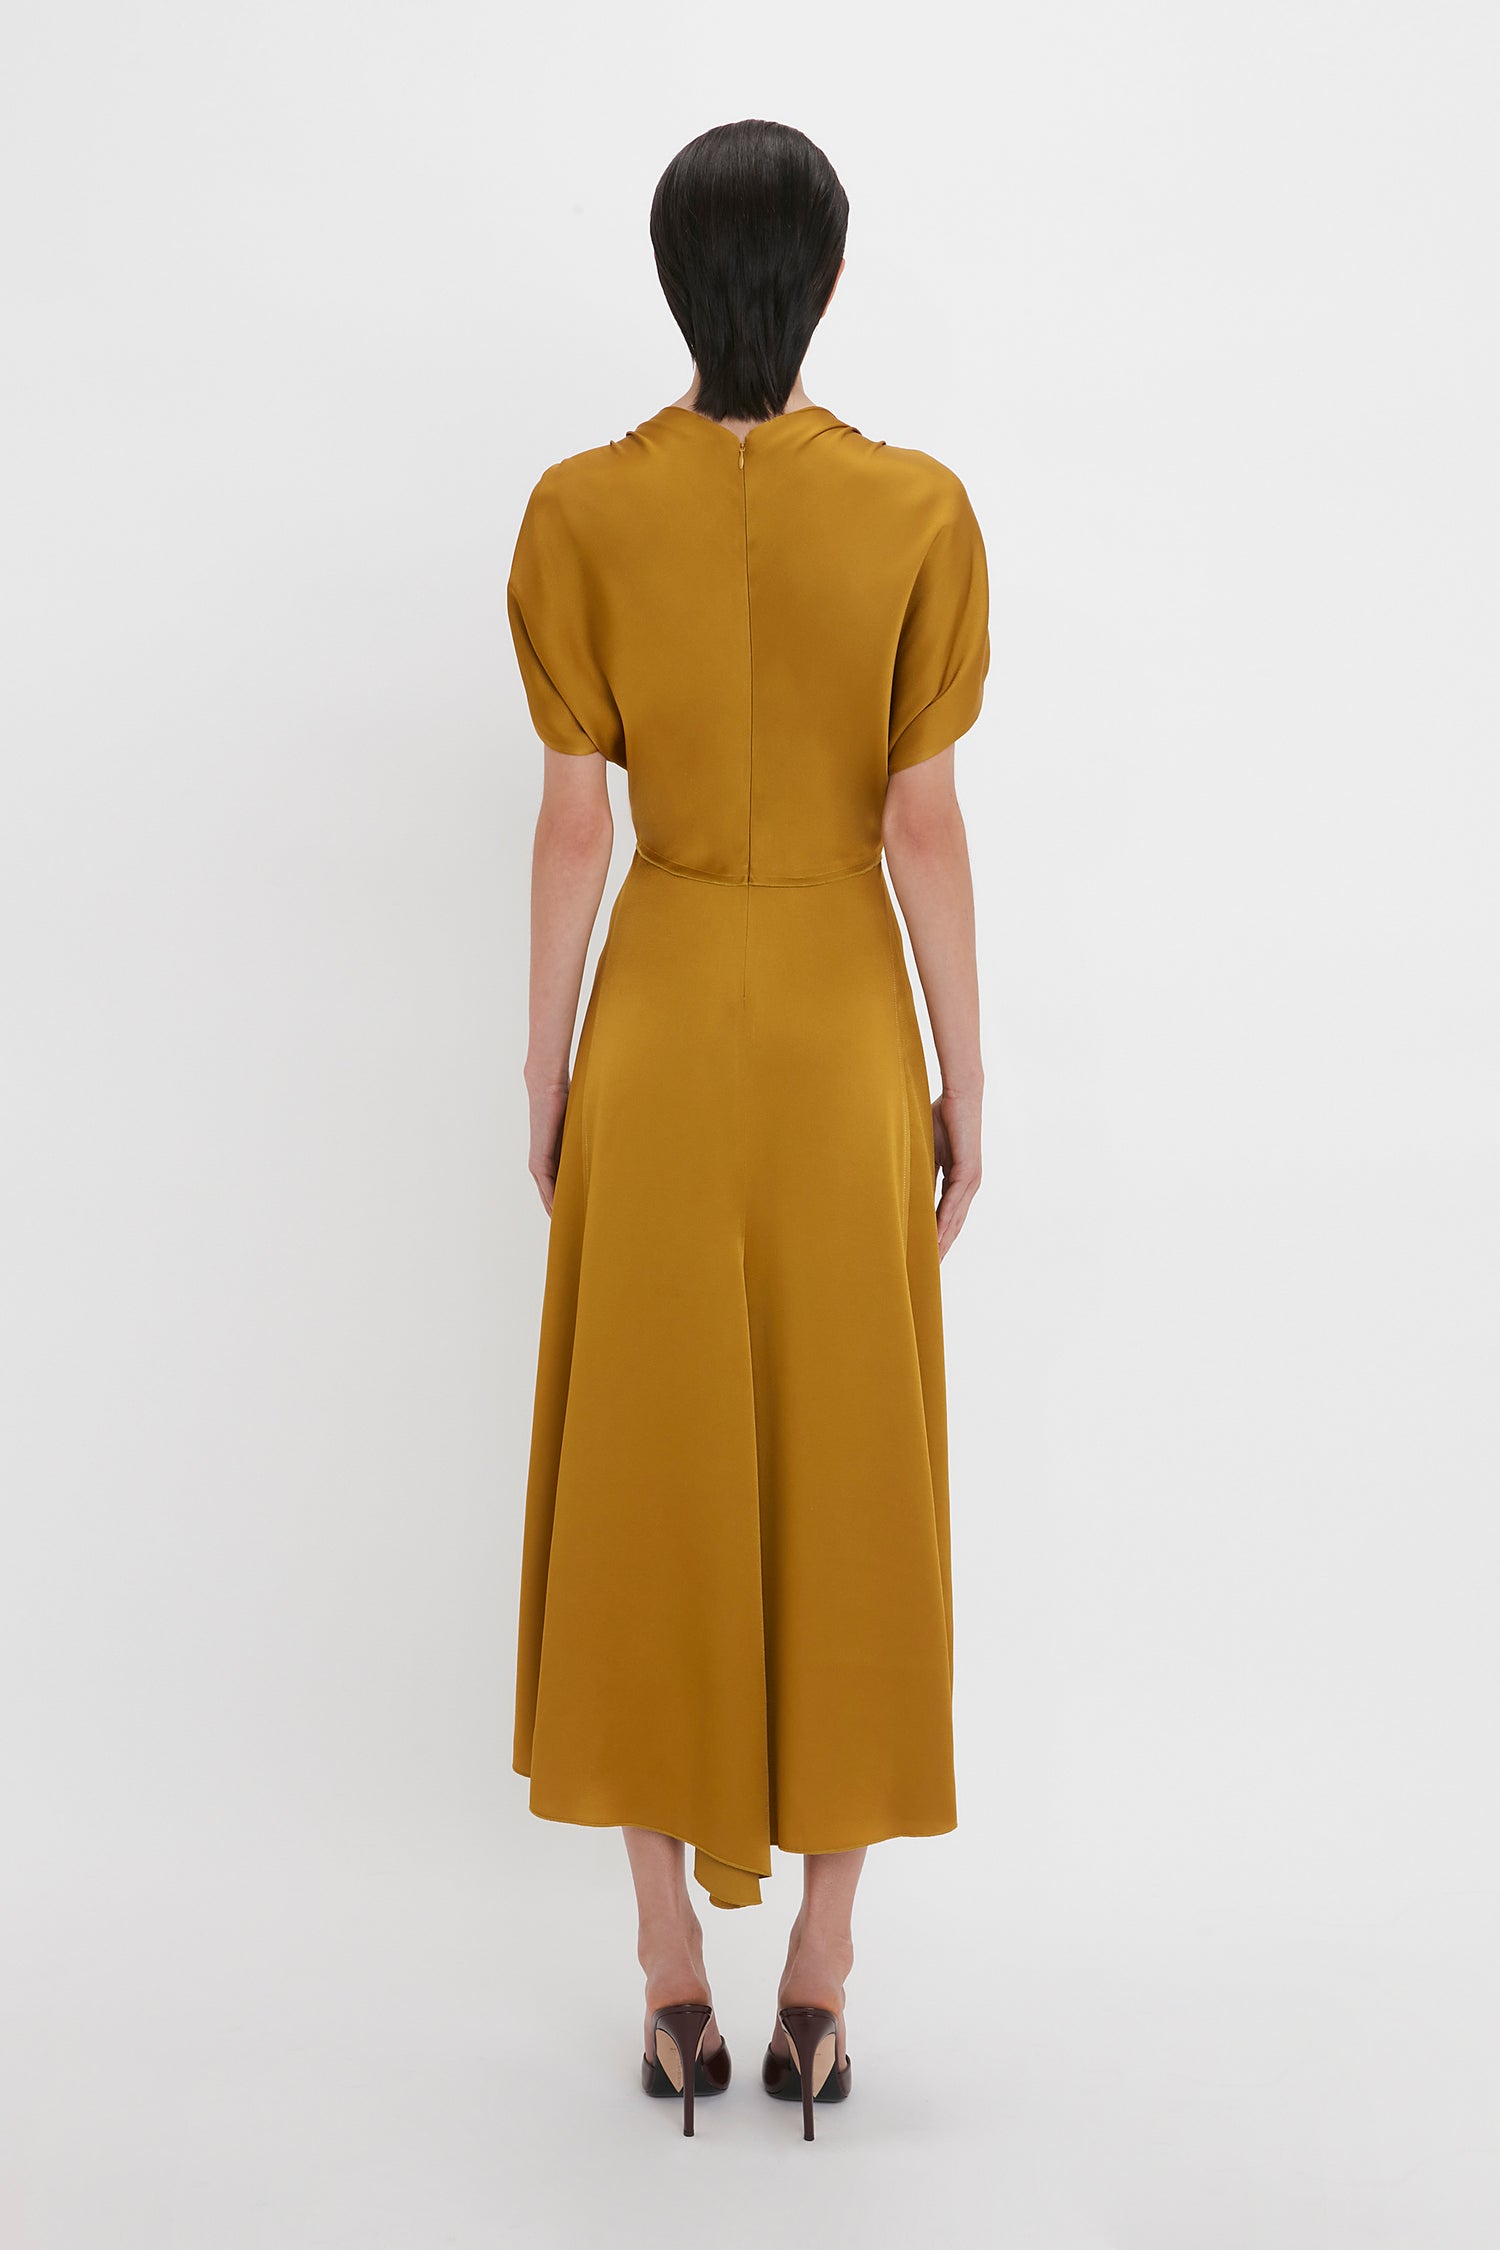 A person with dark hair is standing and facing away, wearing a Victoria Beckham V-Neck Ruffle Midi Dress In Harvest Gold with shoulder frills and black high-heeled shoes against a plain white background.